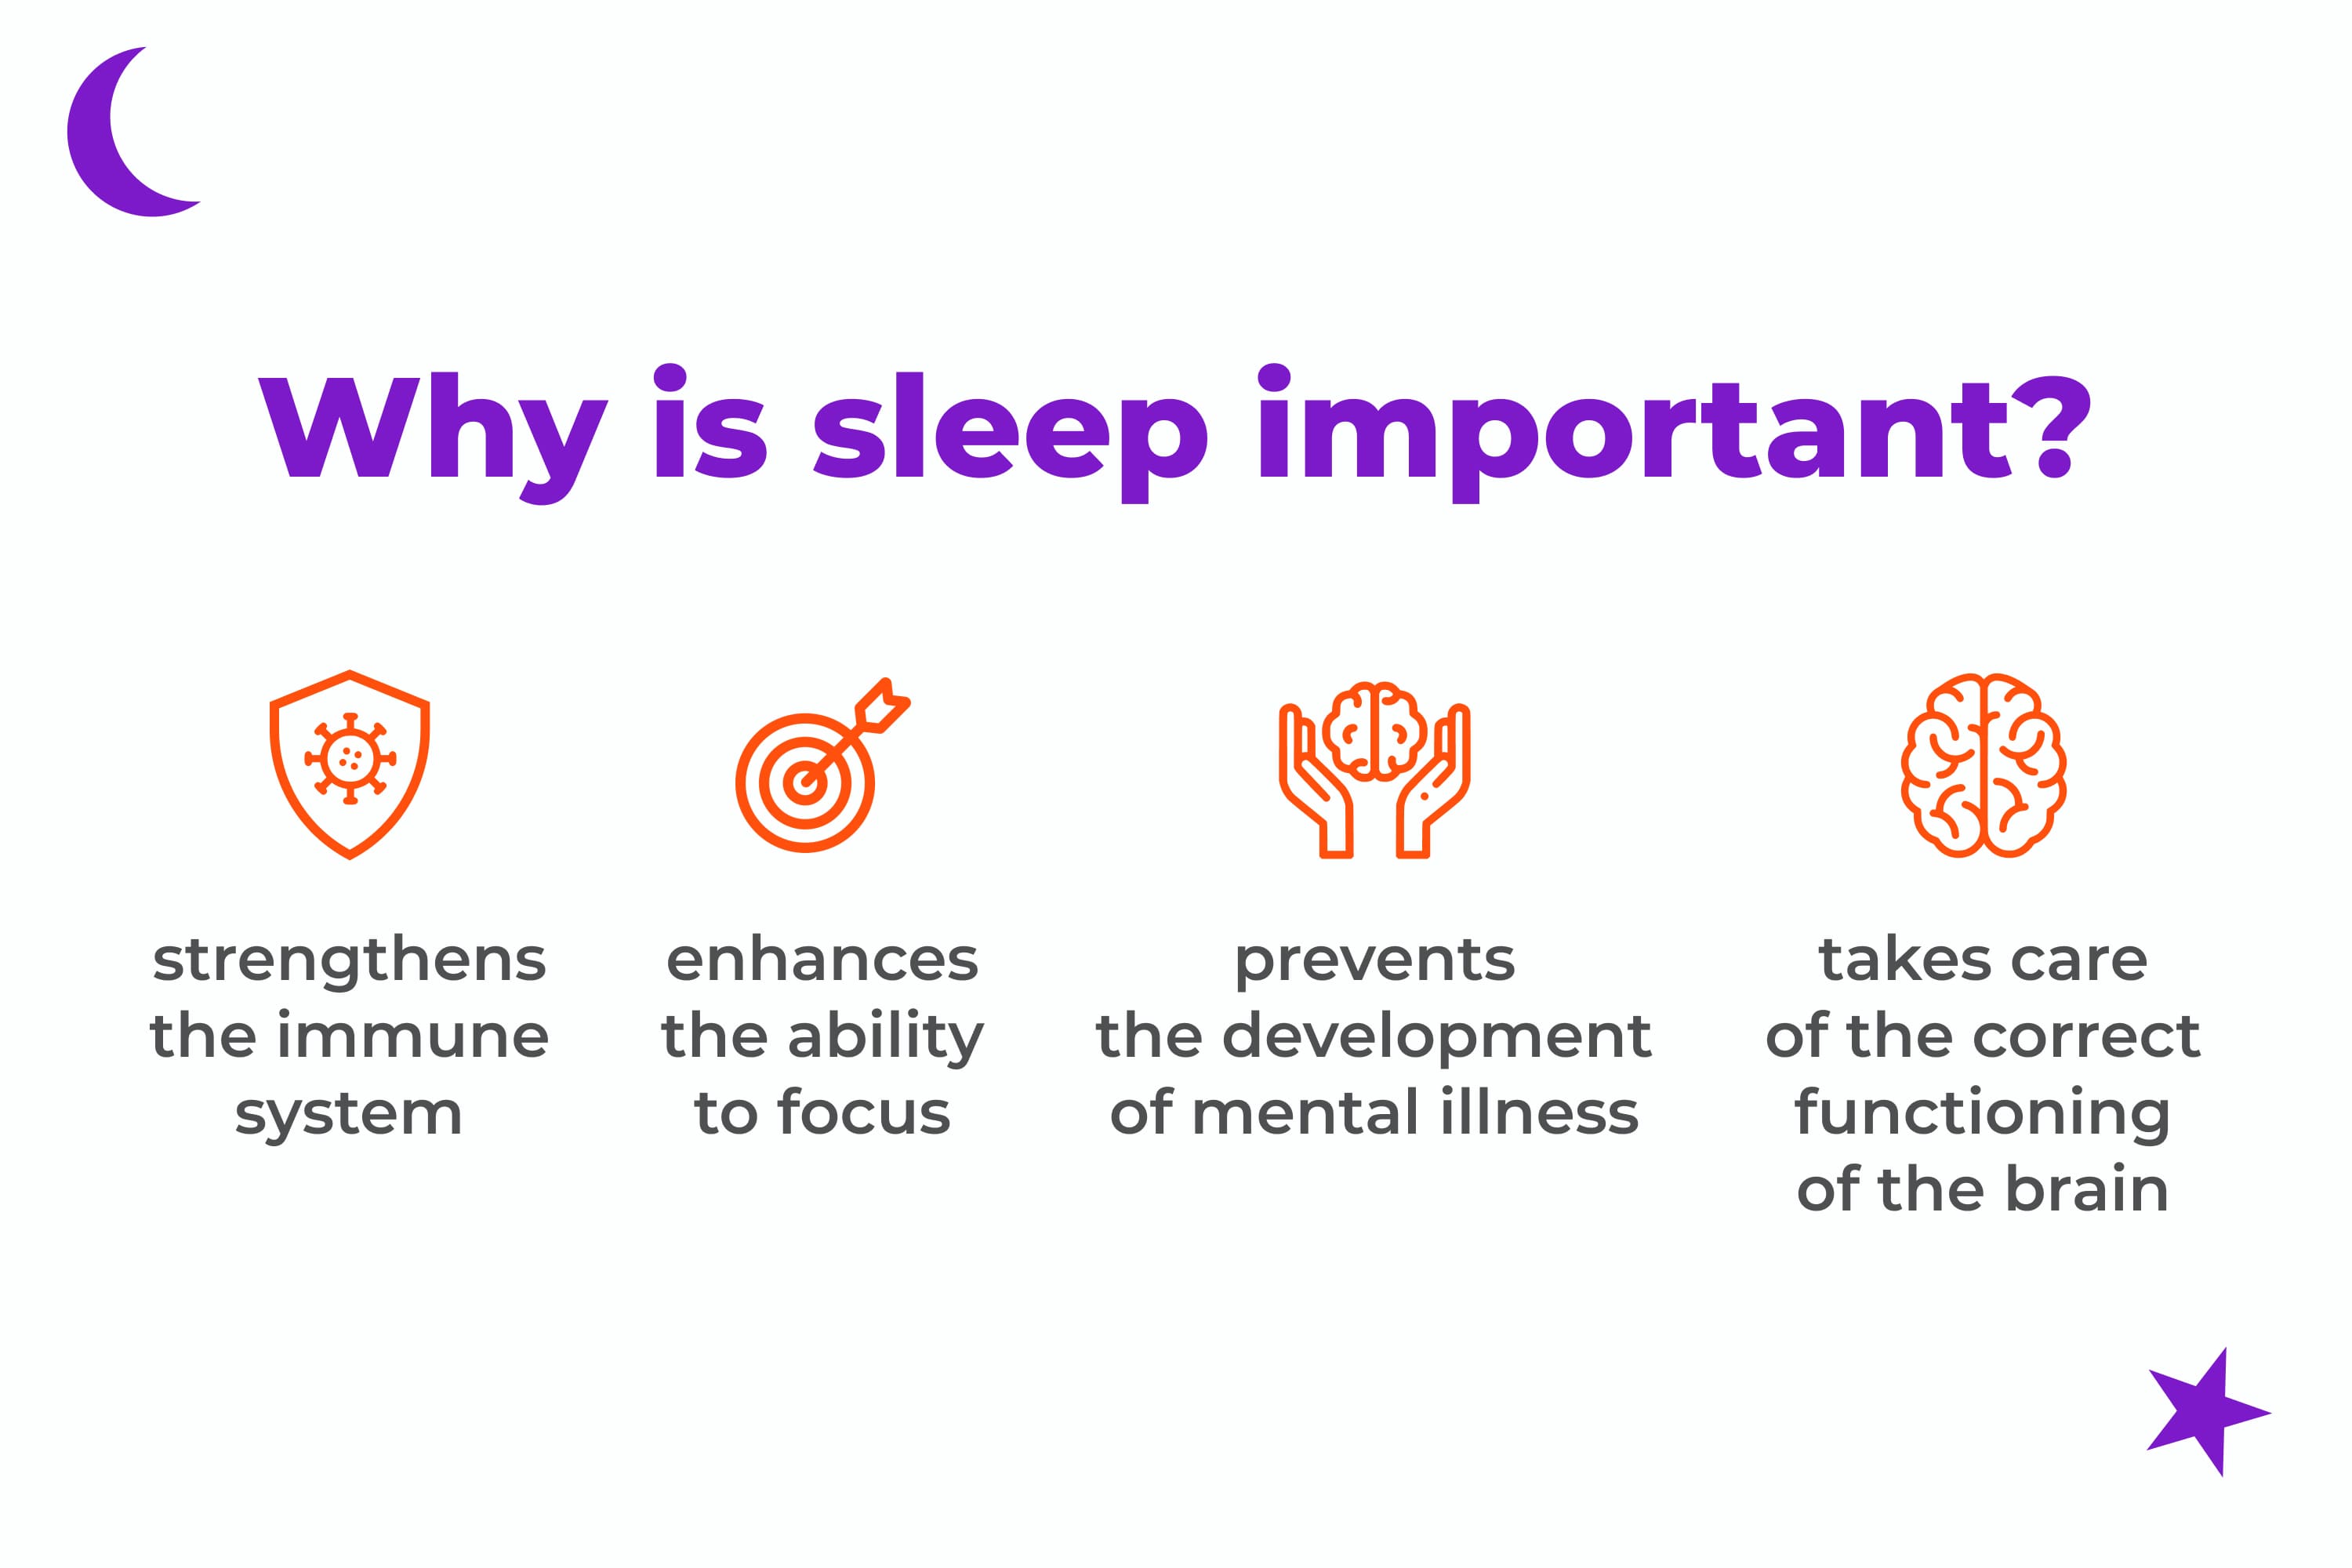 Infographic about sleep importance.